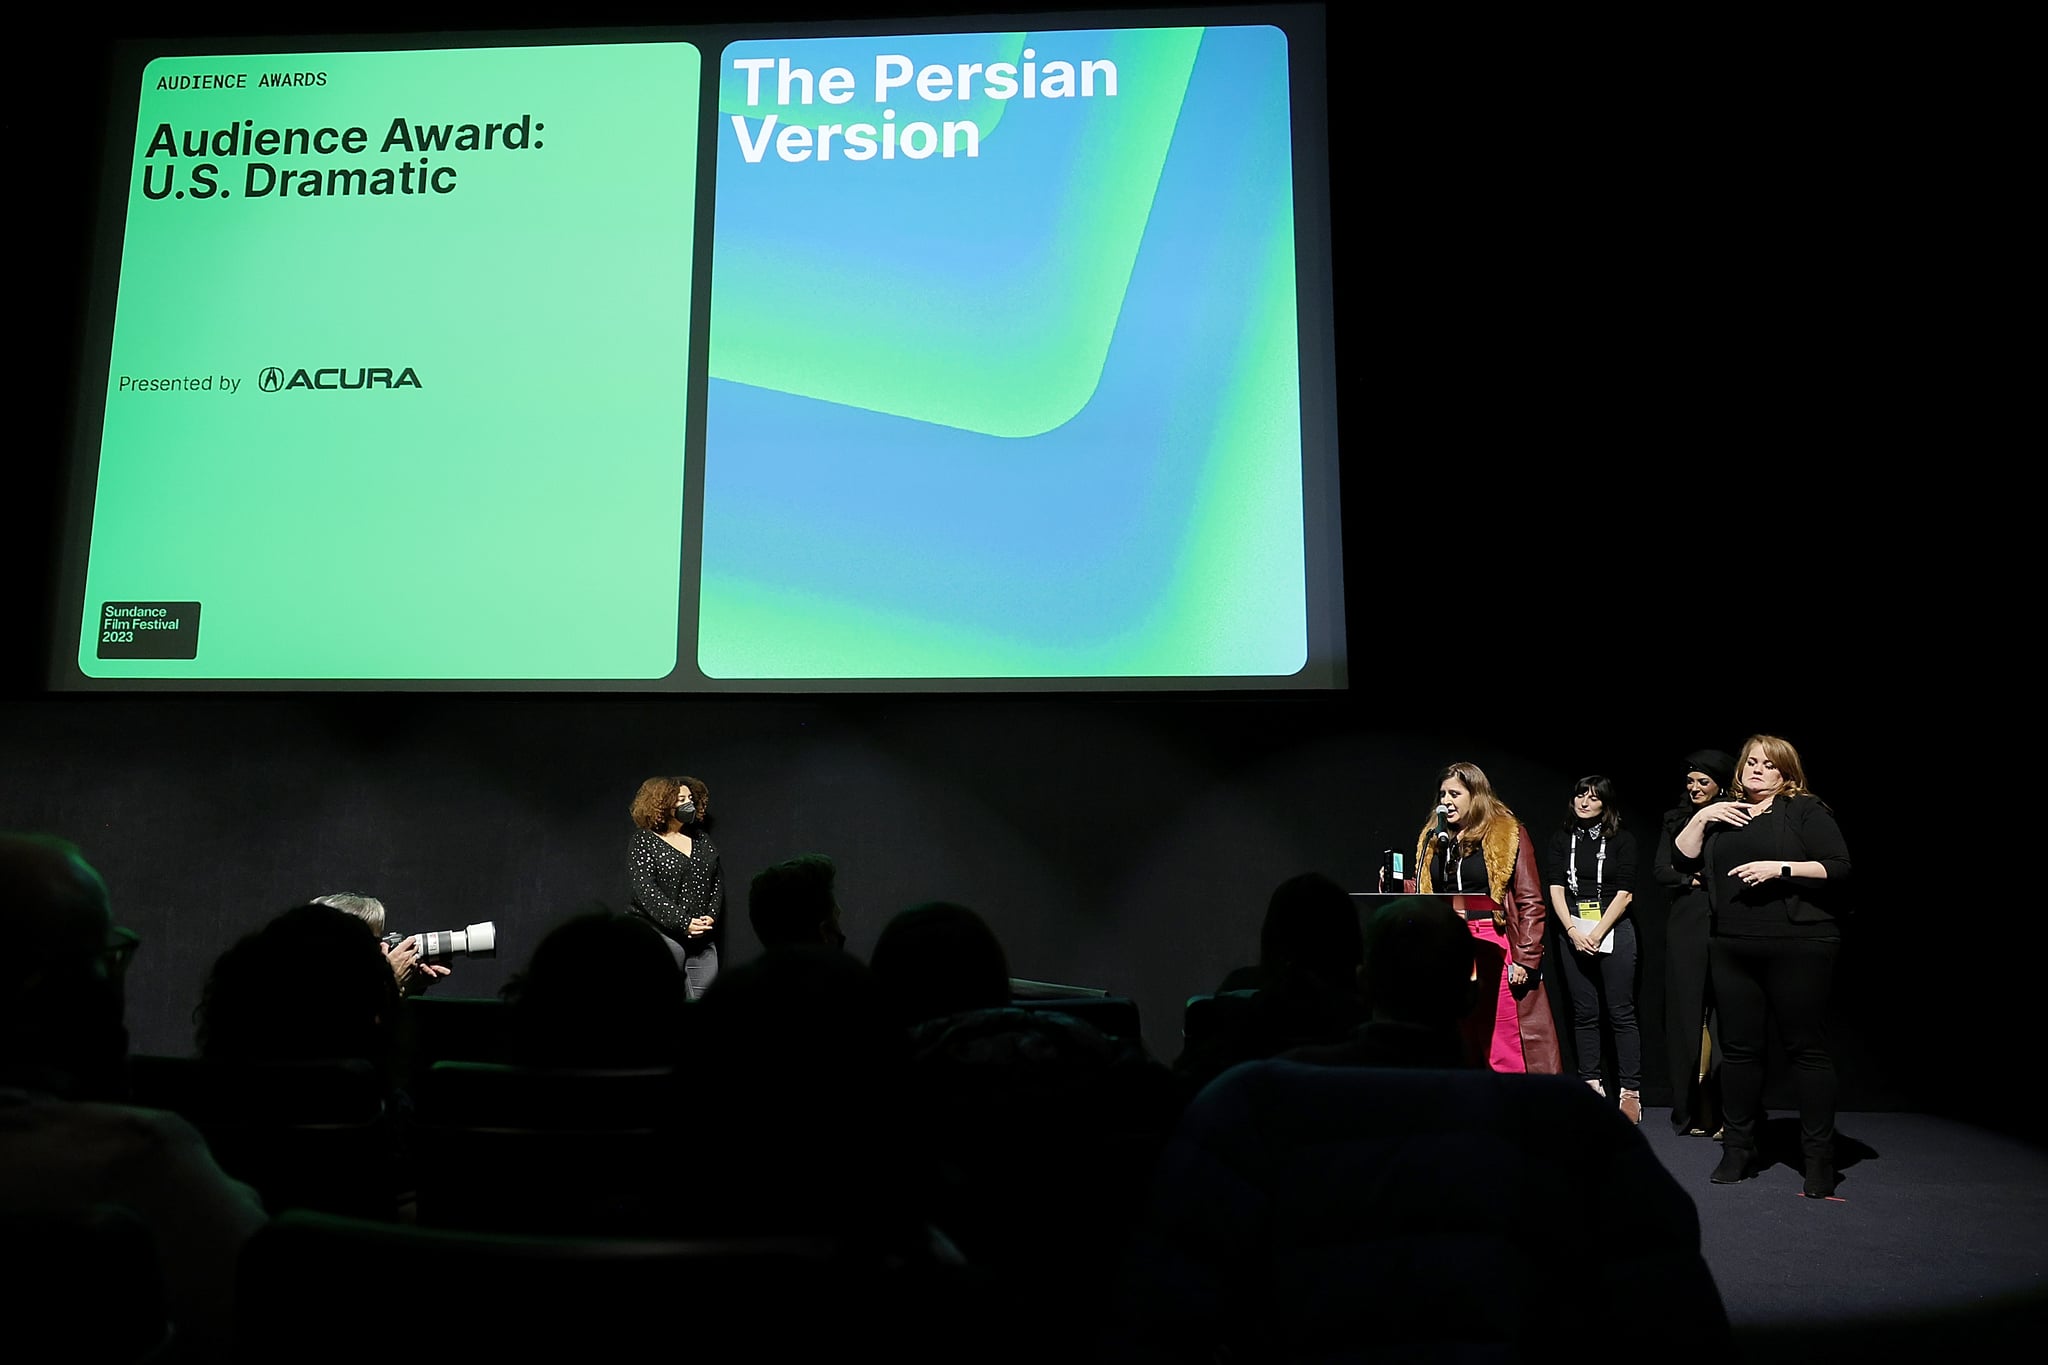 PARK CITY, UTAH - JANUARY 27: Maryam Keshavarz accepts  The Audience Award: U.S. Dramatic for 'THE PERSIAN VERSION' during the 2023 Sundance Film Festival Awards Ceremony at The Ray Theatre on January 27, 2023 in Park City, Utah. (Photo by Michael Loccisano/Getty Images)